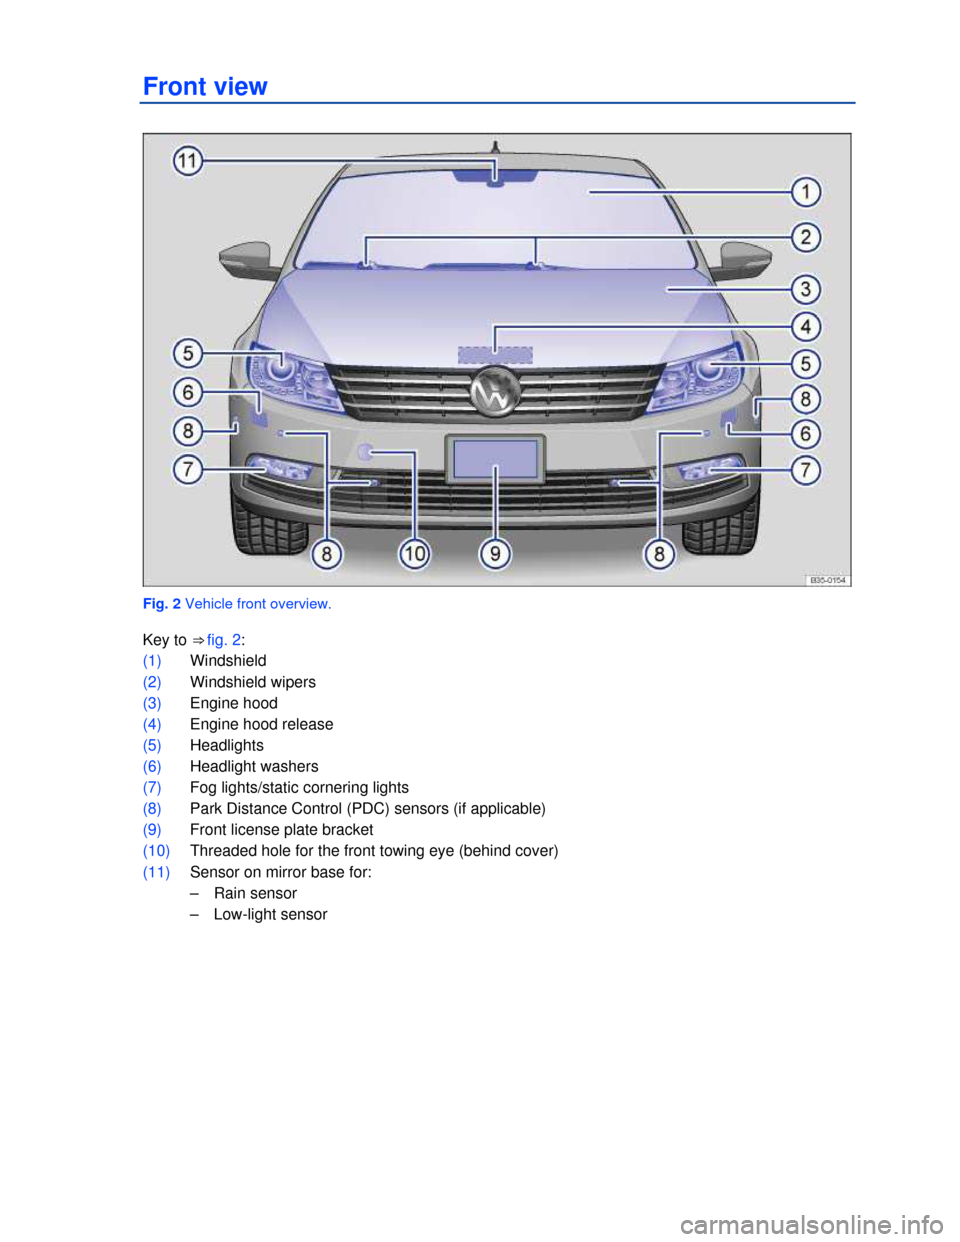 VOLKSWAGEN PASSAT CC 2013 1.G Owners Manual  
Front view 
 
Fig. 2 Vehicle front overview. 
Key to ⇒ fig. 2: 
(1) Windshield 
(2) Windshield wipers  
(3) Engine hood  
(4) Engine hood release  
(5) Headlights  
(6) Headlight washers  
(7) F